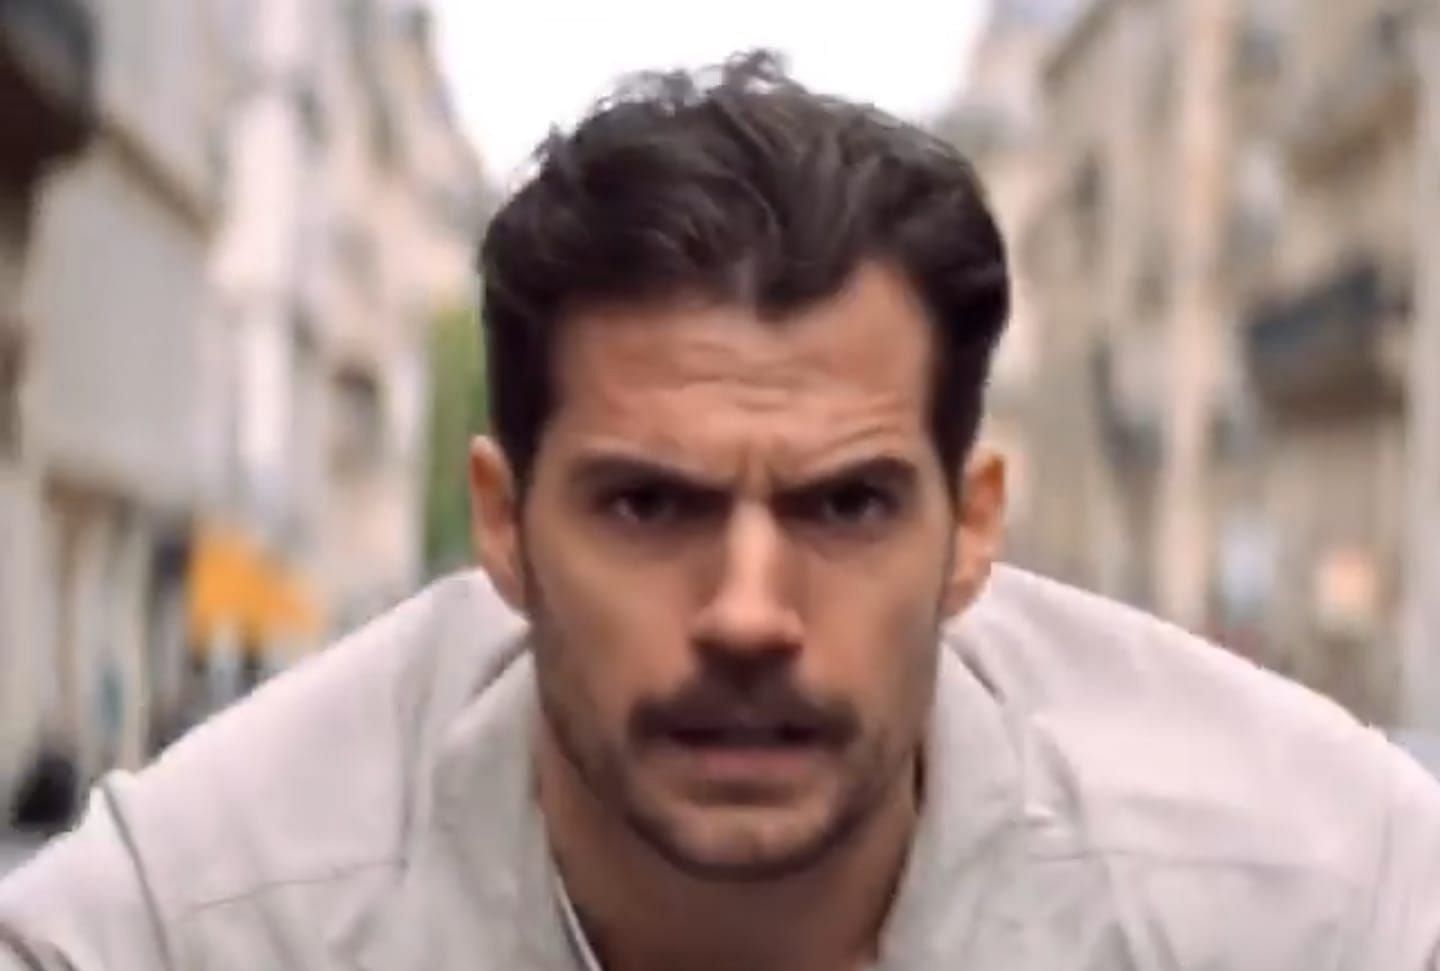 Mission: Impossible — Fallout' and the redemption of Henry Cavill